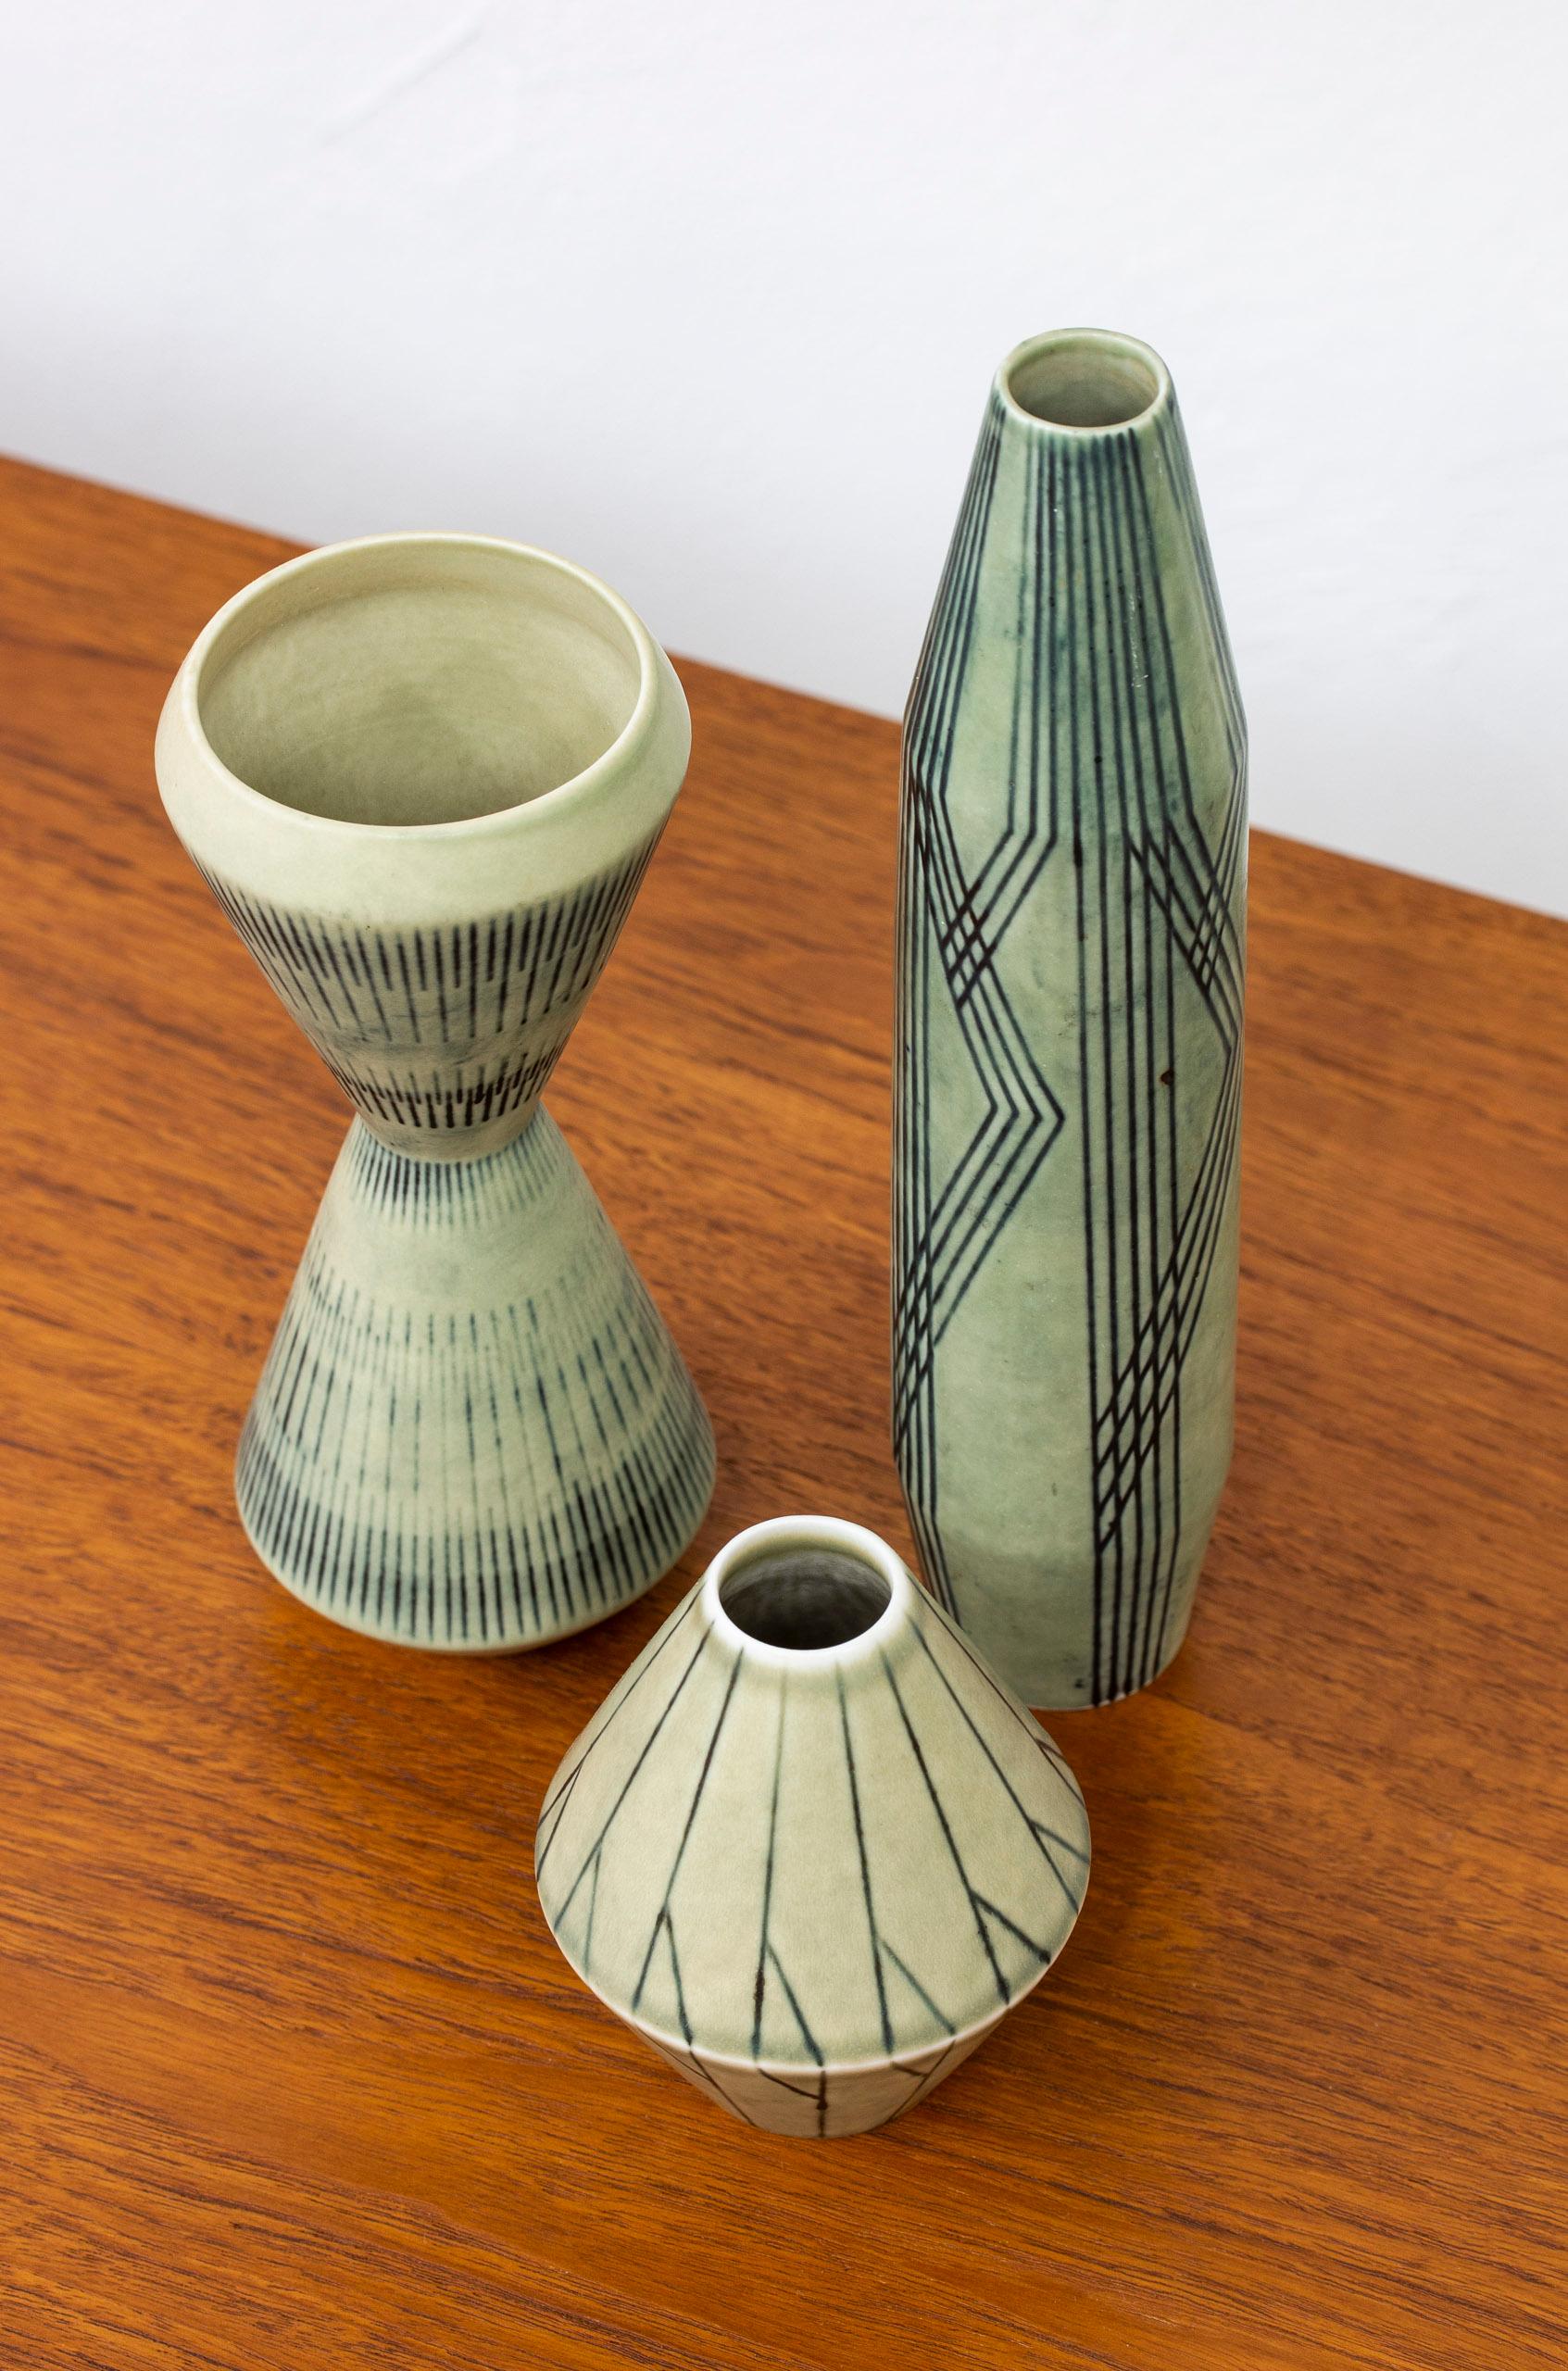 Set of htree vases designed by Carl.Harry Stålhane. hand made at Rörstrand in Sweden during the 1950s. Made from stoneware with abstract decor on light green glazes. Very good condition with light age related patina.

Dimensions: H. 11/20/25.5 Ø.